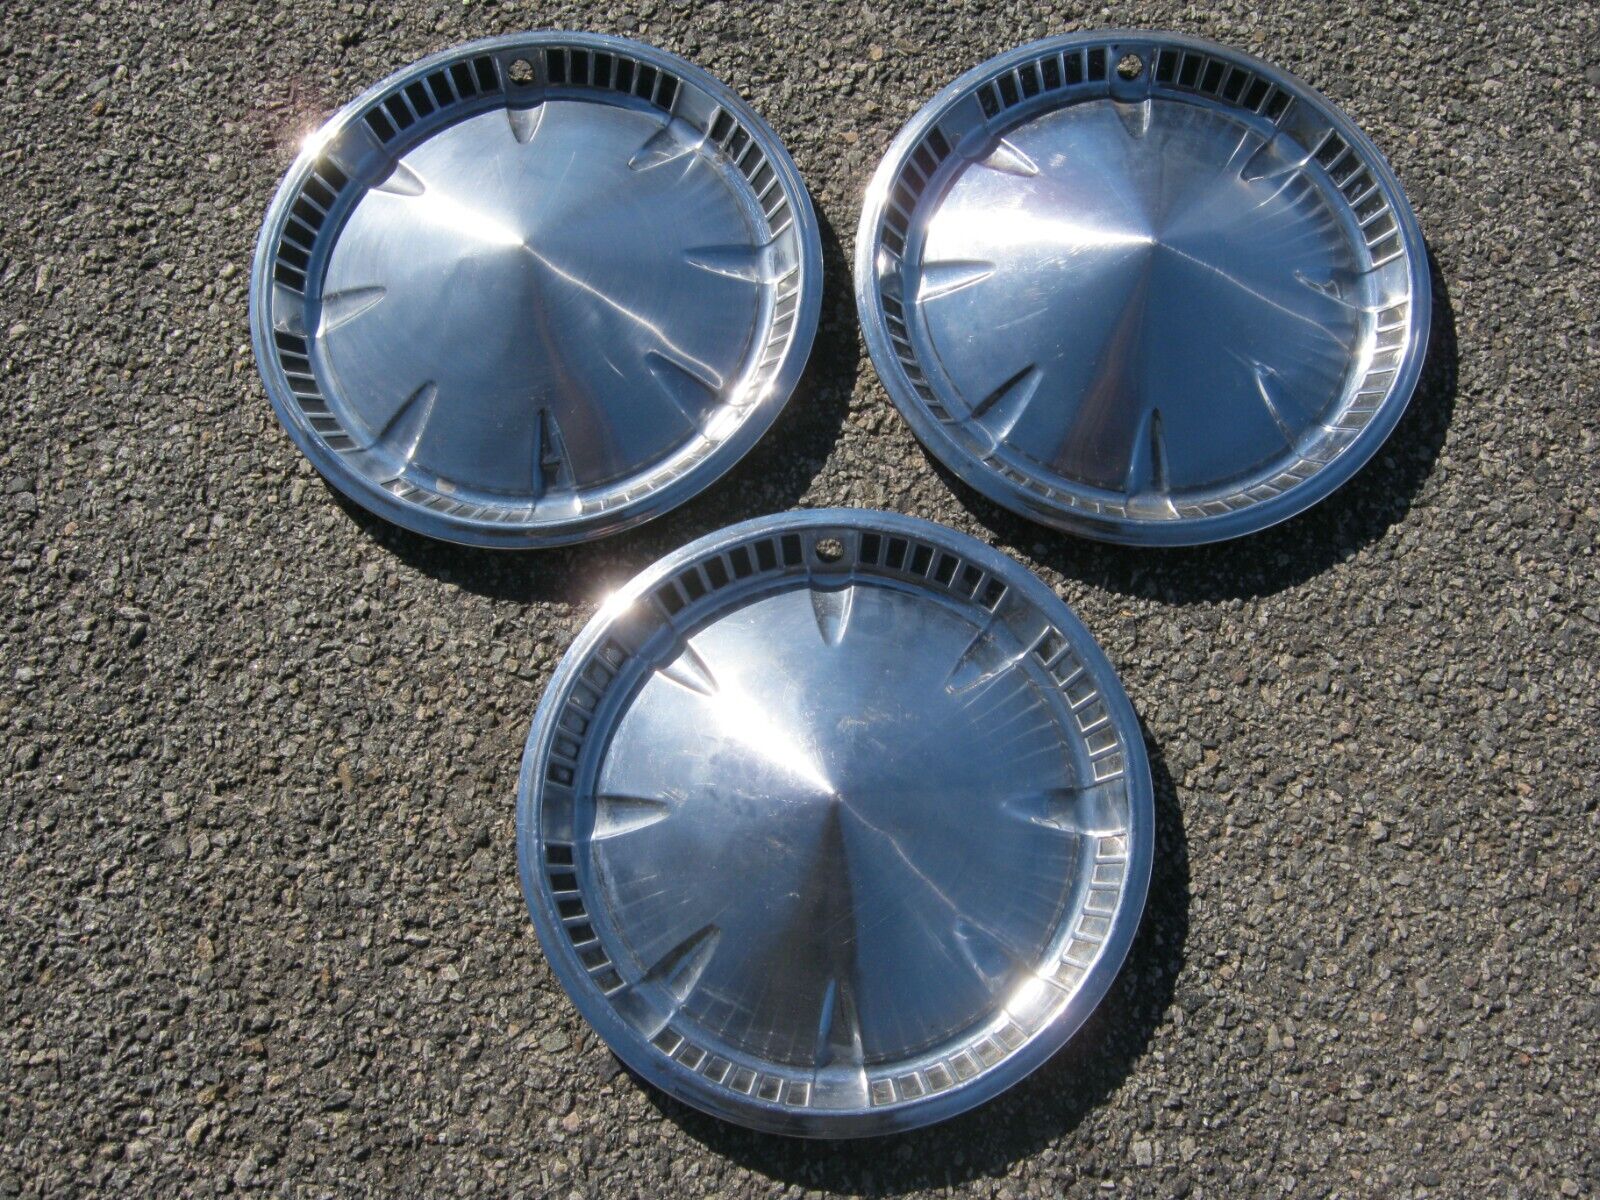 Lot of 3 factory 1959 Plymouth Fury Belvedere 14 inch hubcaps wheel covers